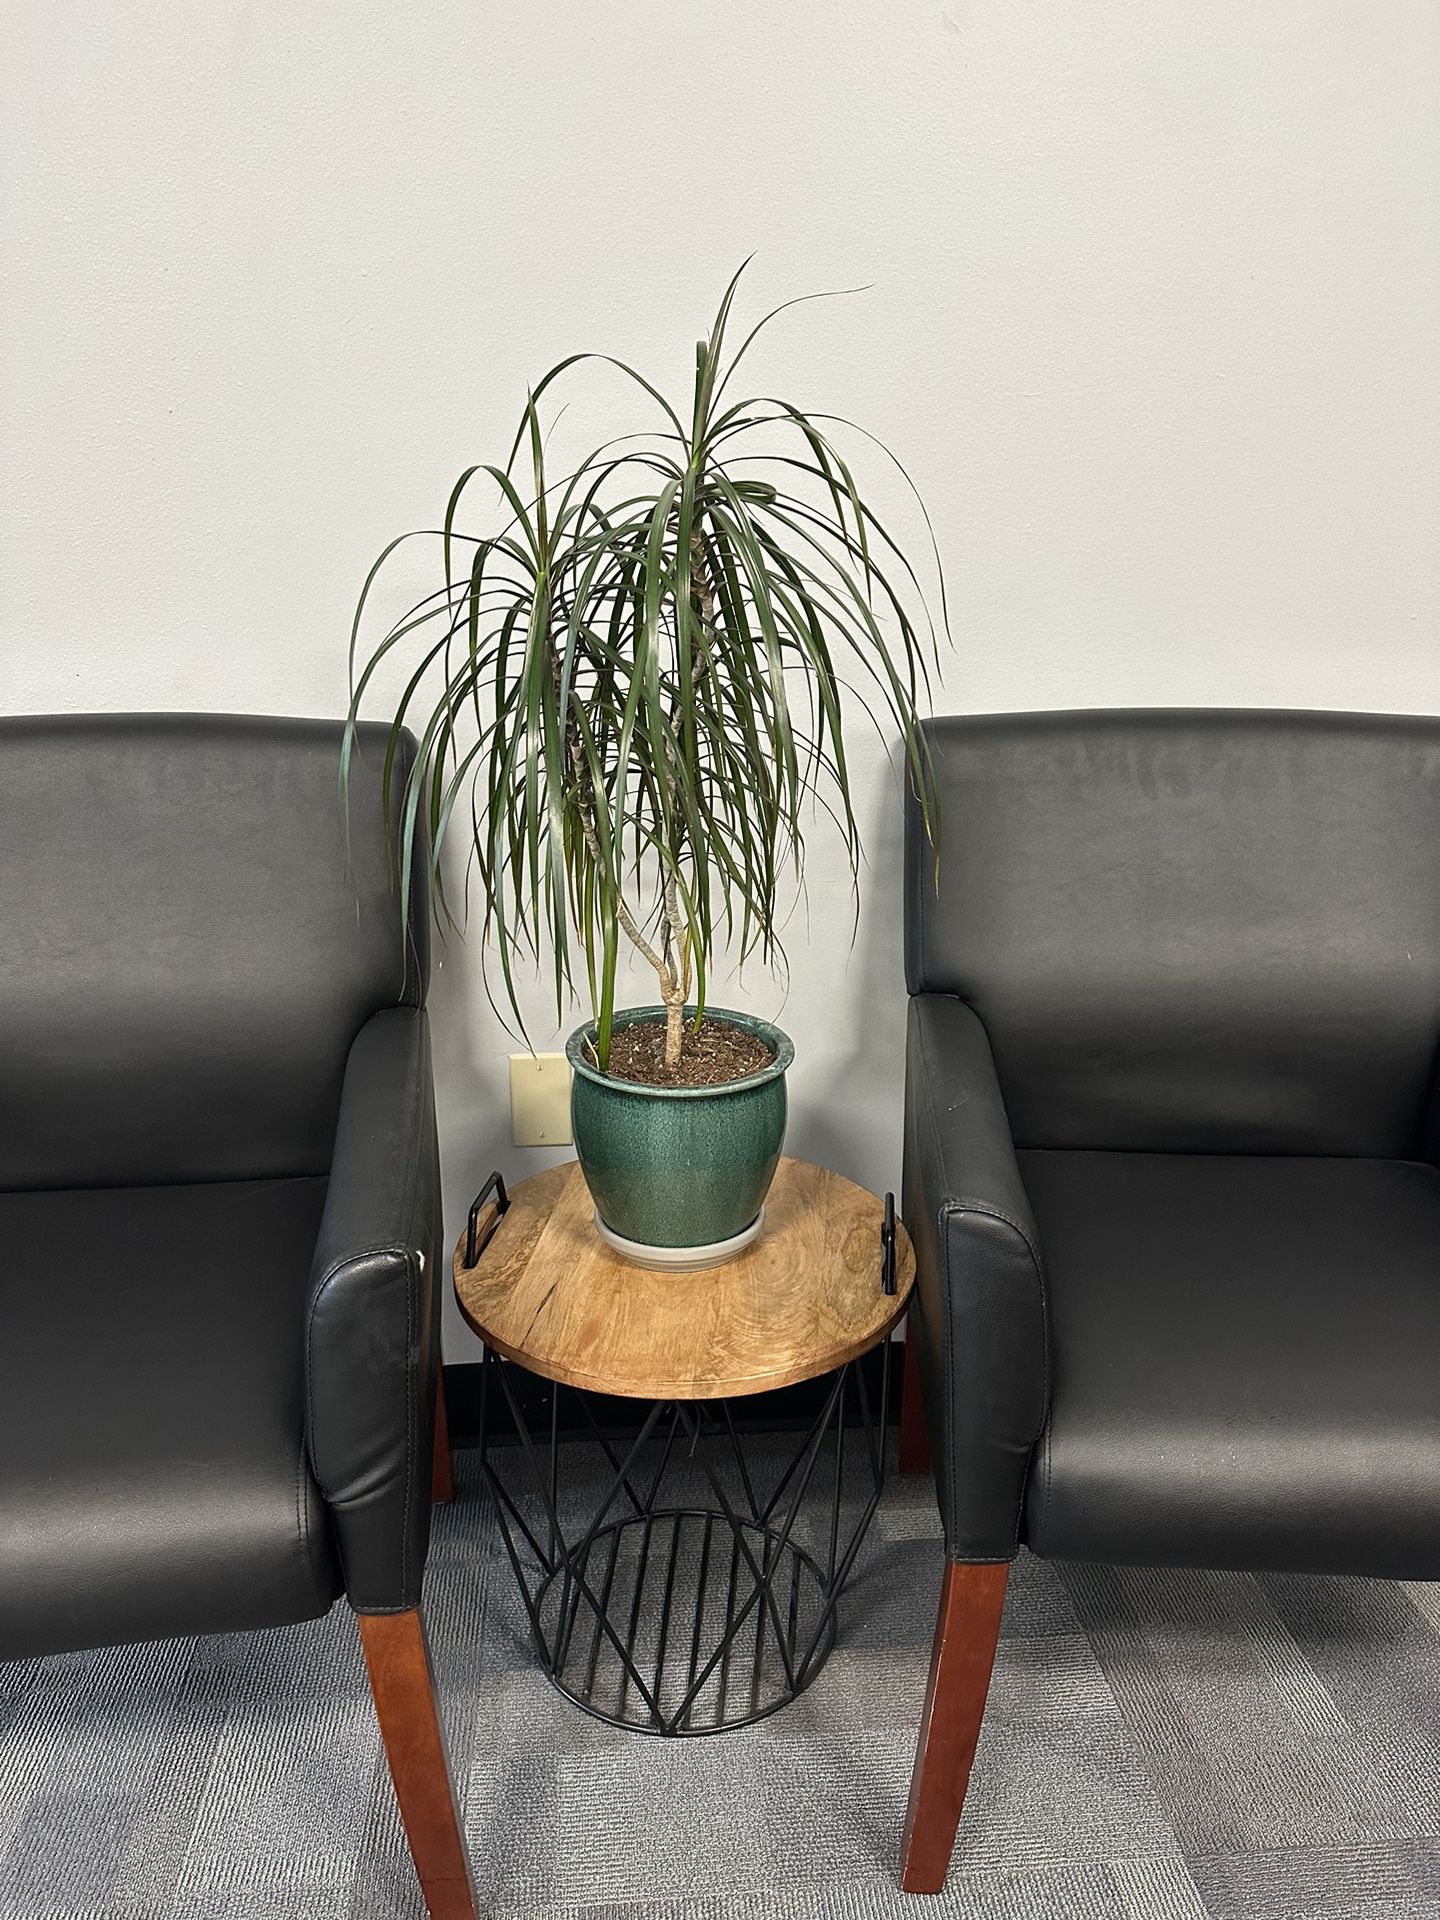 Live Plant, Dragon Tree Plant With The Pot